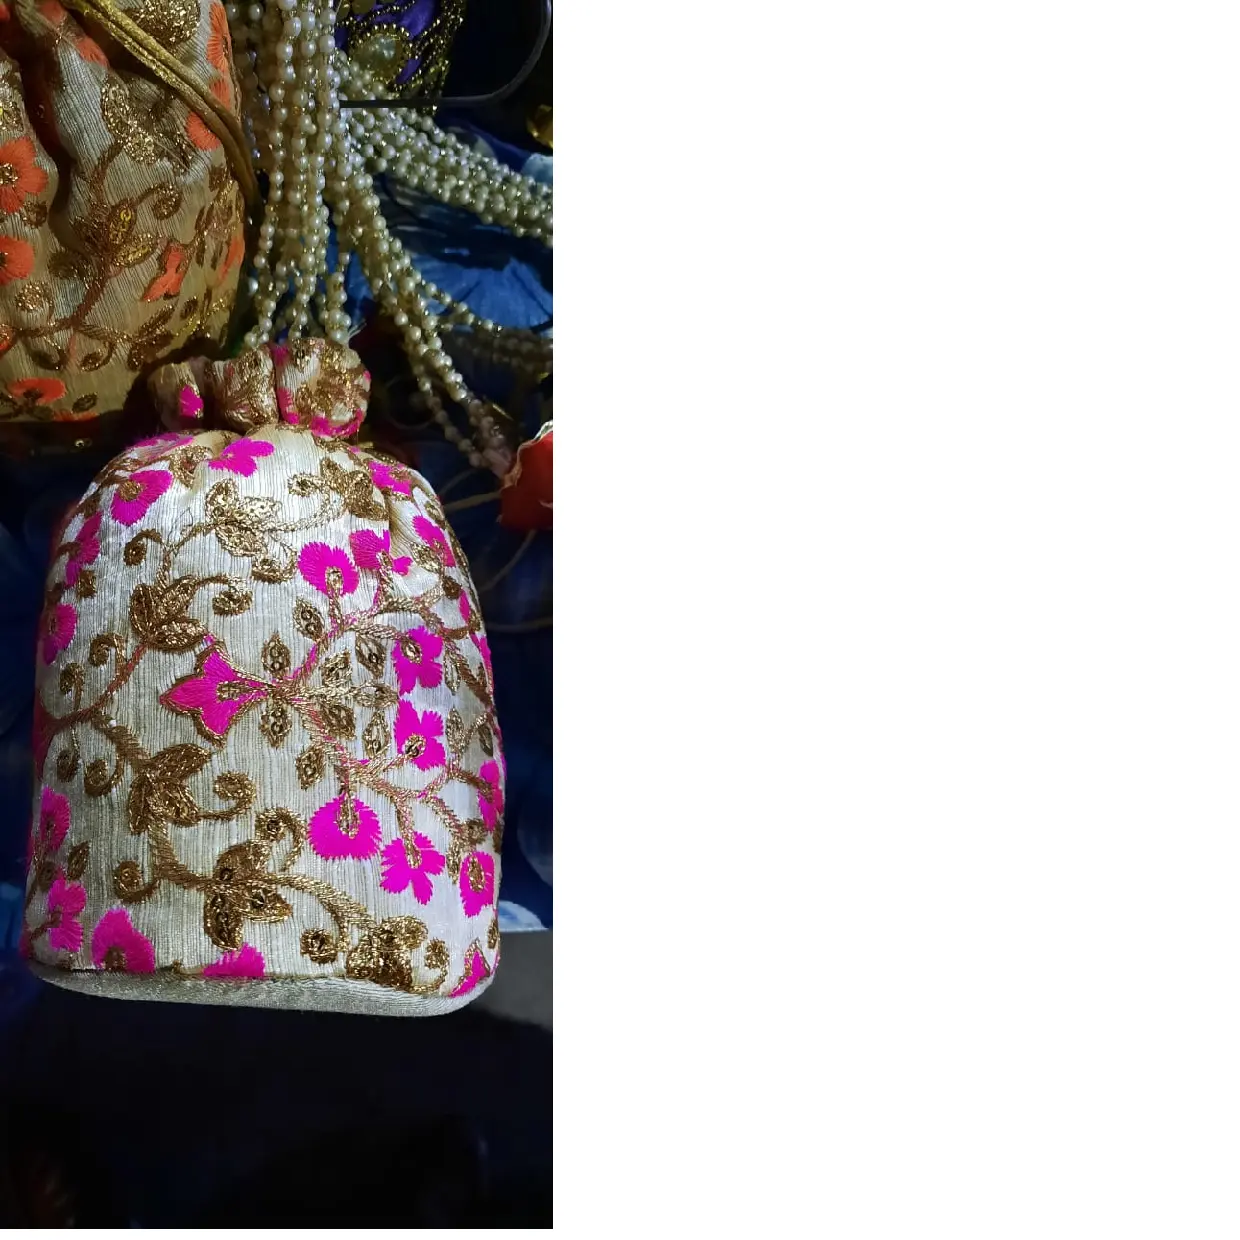 custom made floral embroidered drawstring bags suitable for use as wedding favors available in an assortment of colors